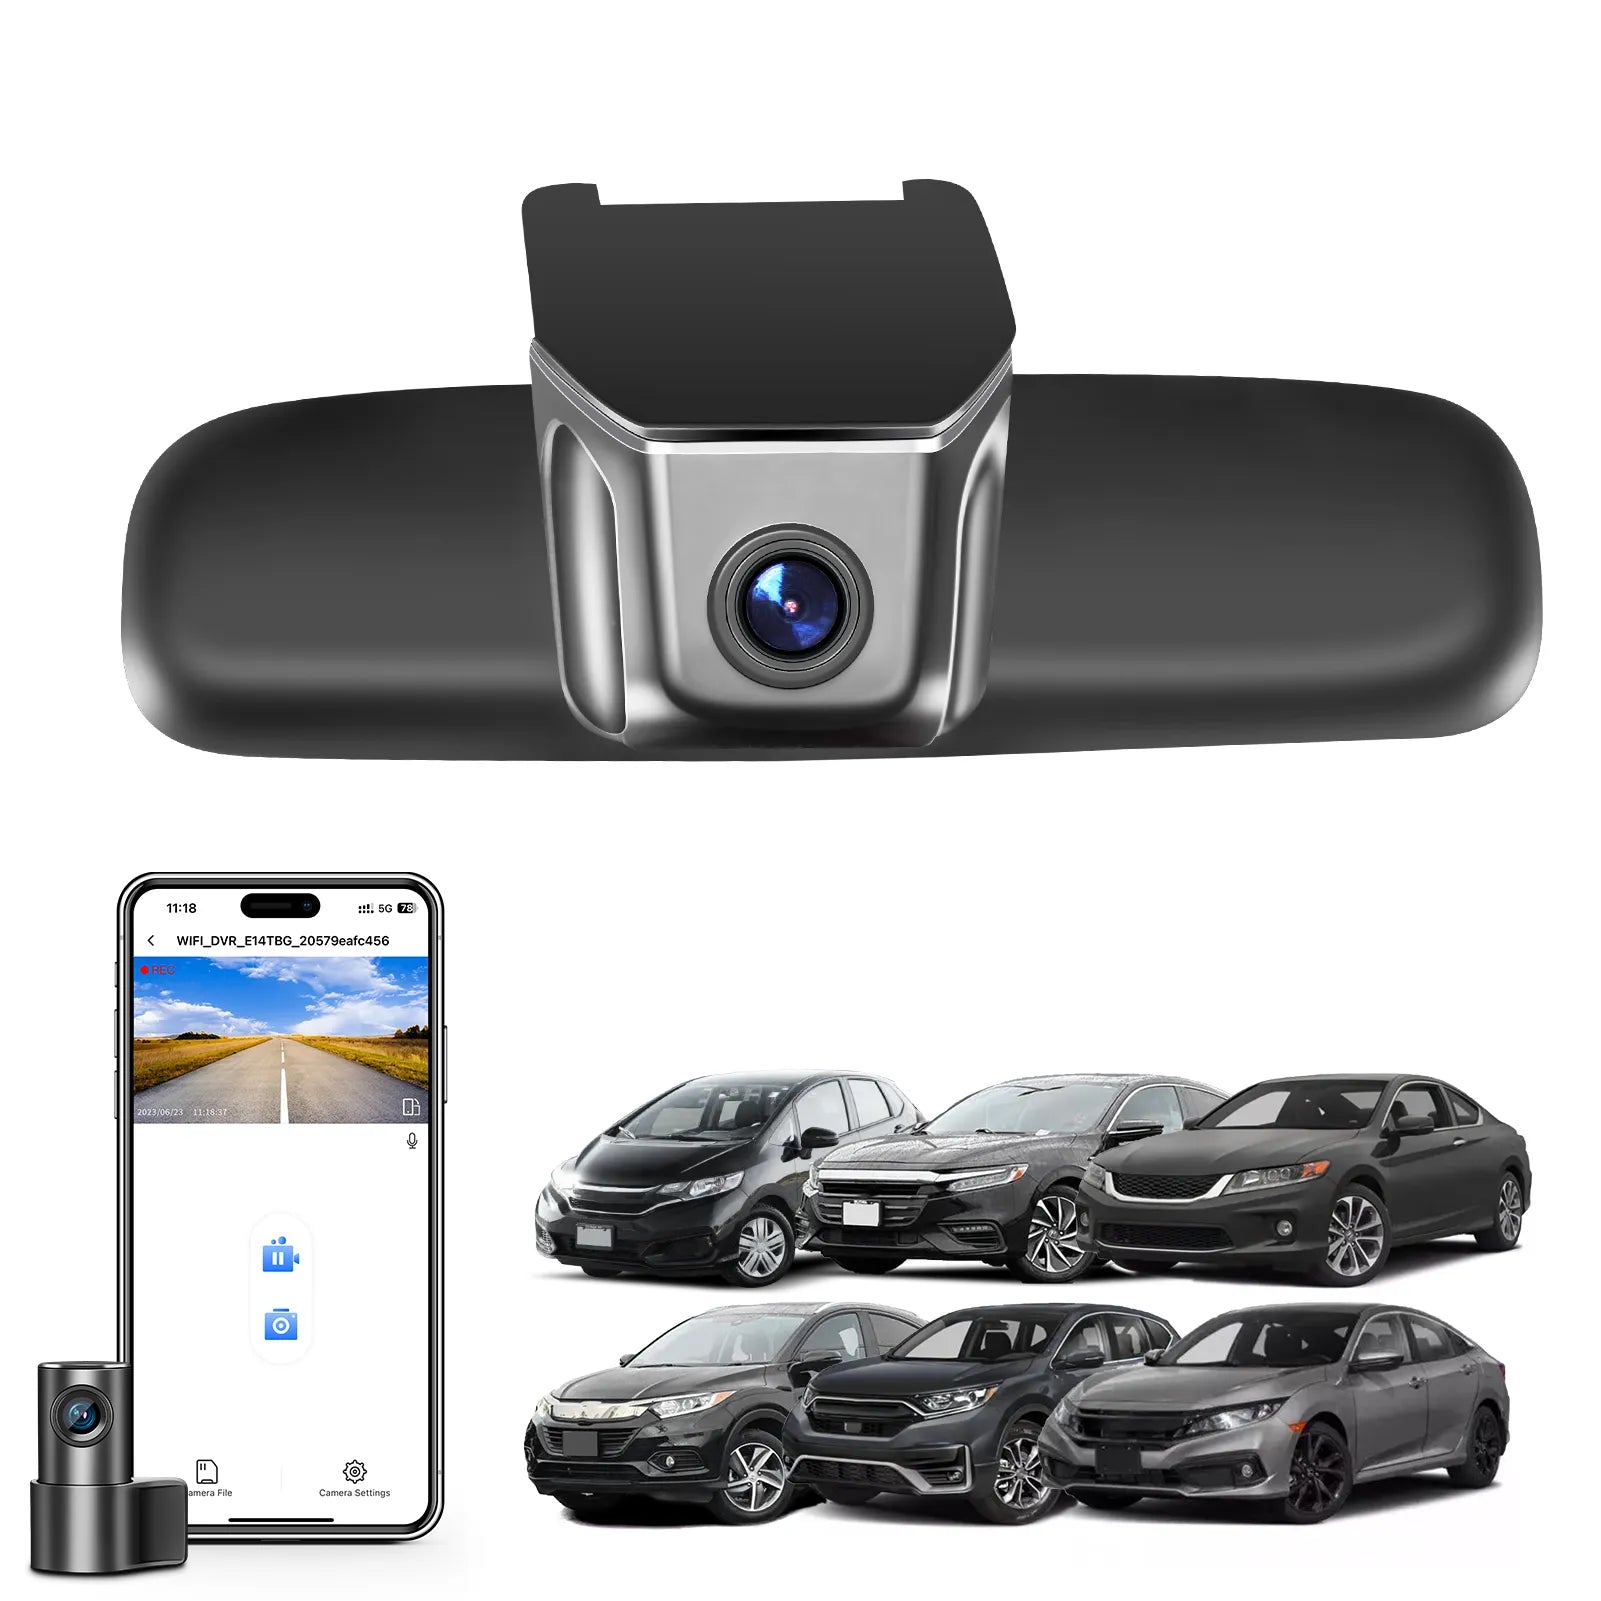 Front 4K & Rear 1080p Dash Cam for Honda CRV 2007-2022, Civic 2009-2021, Accord 2008-2022, HRV 2016-2022(More Vehicle Service Type in The 1st Bullet Point), WiFi & App, 128GB Card(Model B)